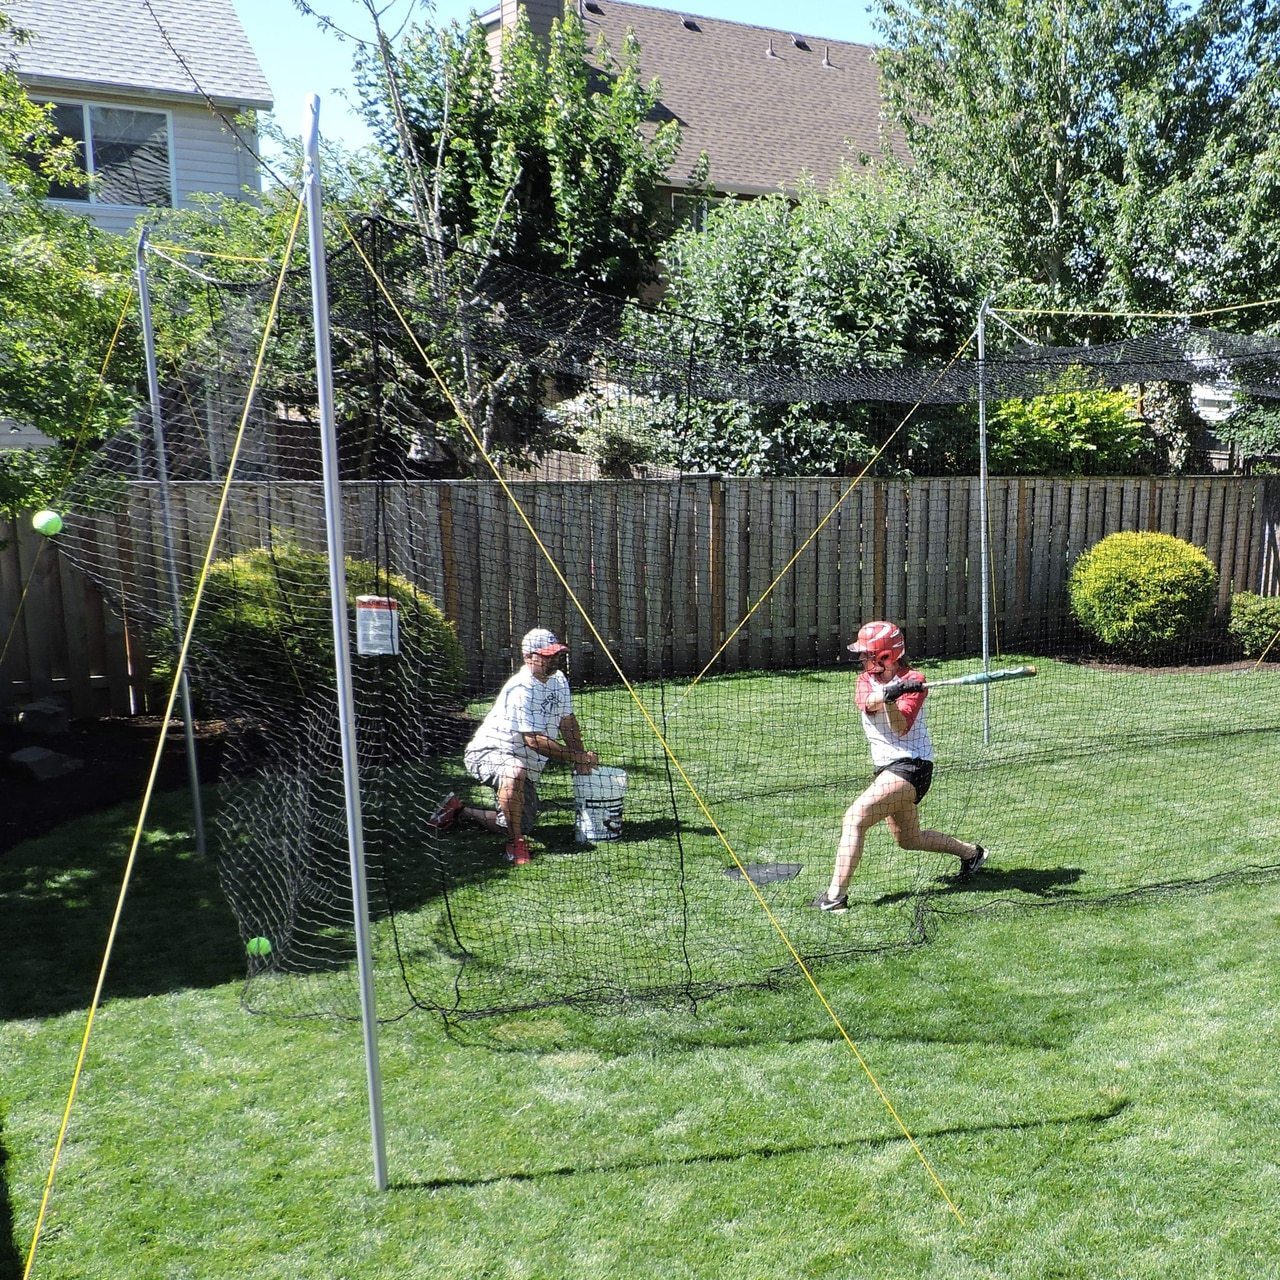 Jugs Hit at Home Complete Backyard Batting Cage Training with Female Batter 